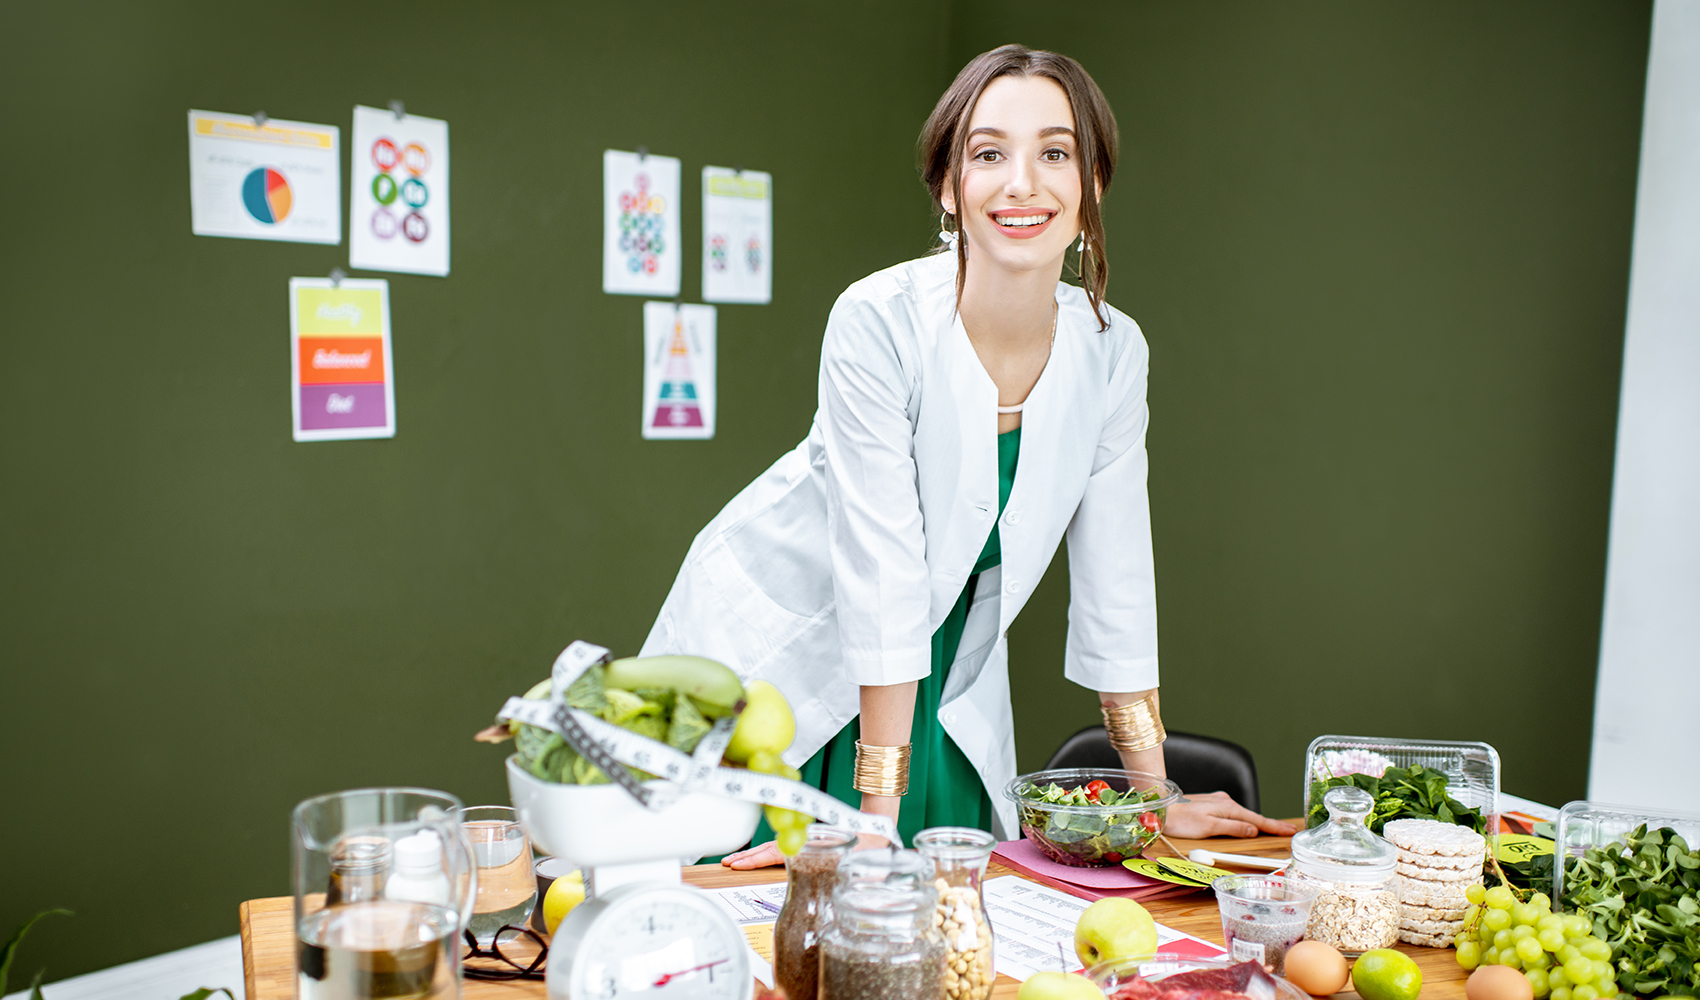 Nutritionist Vs. Dietitian: What’s the Difference?